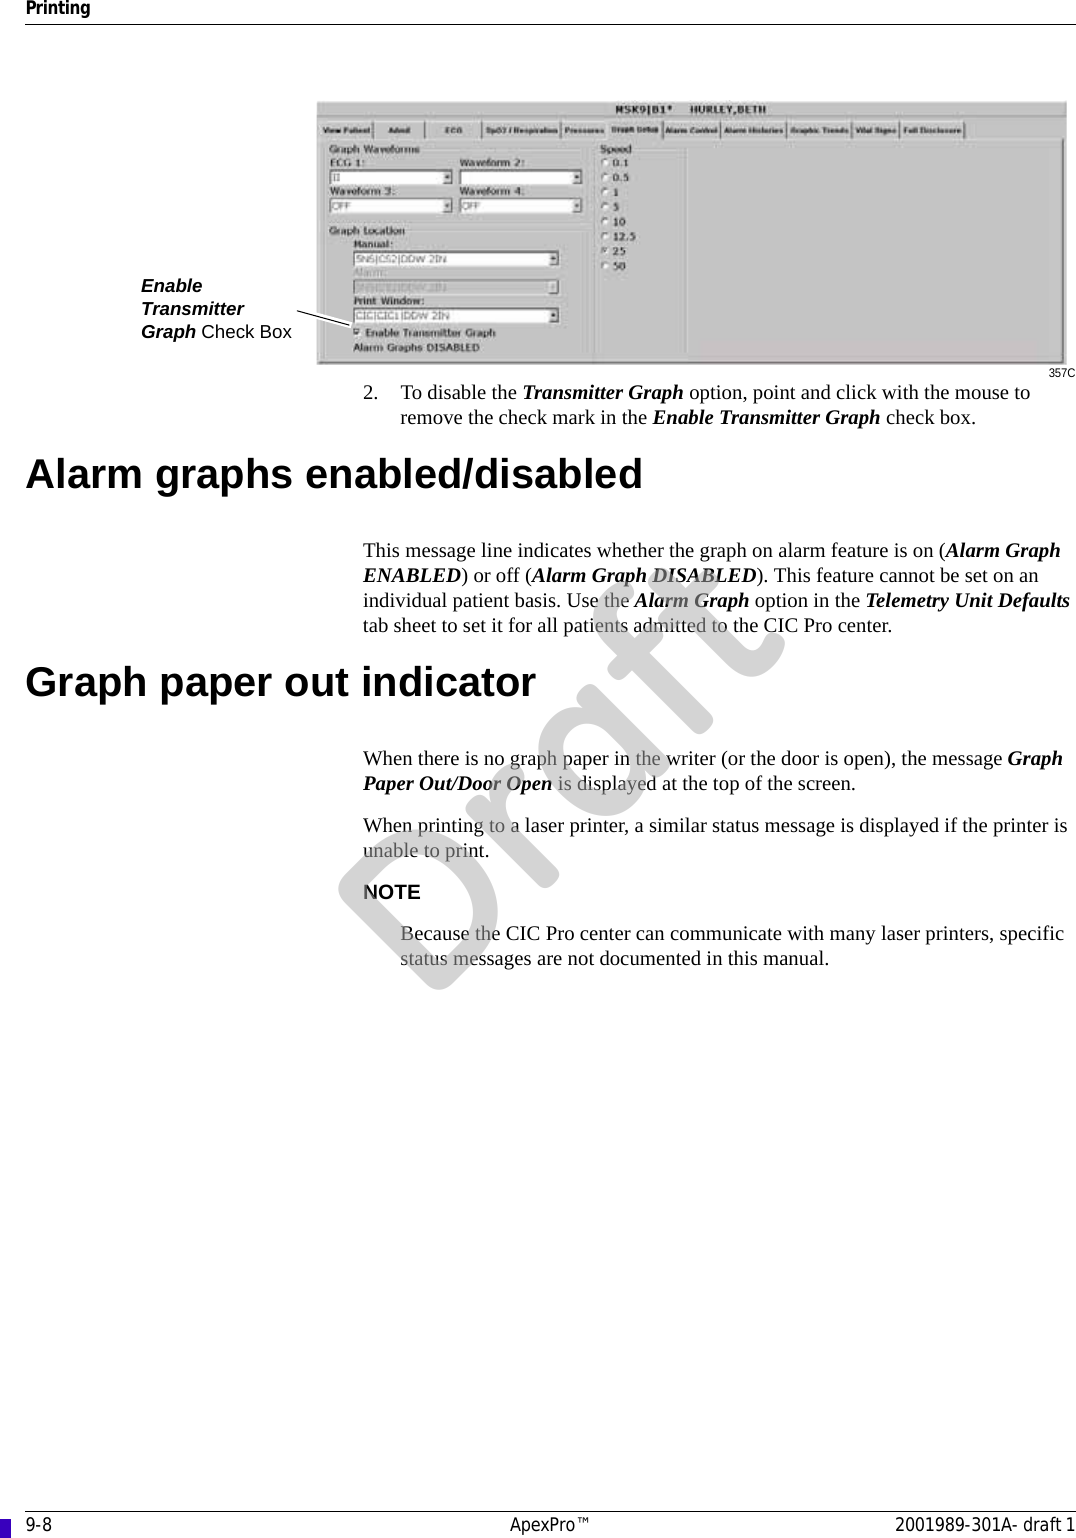 9-8 ApexPro™ 2001989-301A- draft 1Printing357C2. To disable the Transmitter Graph option, point and click with the mouse to remove the check mark in the Enable Transmitter Graph check box.Alarm graphs enabled/disabledThis message line indicates whether the graph on alarm feature is on (Alarm Graph ENABLED) or off (Alarm Graph DISABLED). This feature cannot be set on an individual patient basis. Use the Alarm Graph option in the Telemetry Unit Defaults tab sheet to set it for all patients admitted to the CIC Pro center.Graph paper out indicatorWhen there is no graph paper in the writer (or the door is open), the message Graph Paper Out/Door Open is displayed at the top of the screen.When printing to a laser printer, a similar status message is displayed if the printer is unable to print.NOTEBecause the CIC Pro center can communicate with many laser printers, specific status messages are not documented in this manual.Enable Transmitter Graph Check BoxDraft